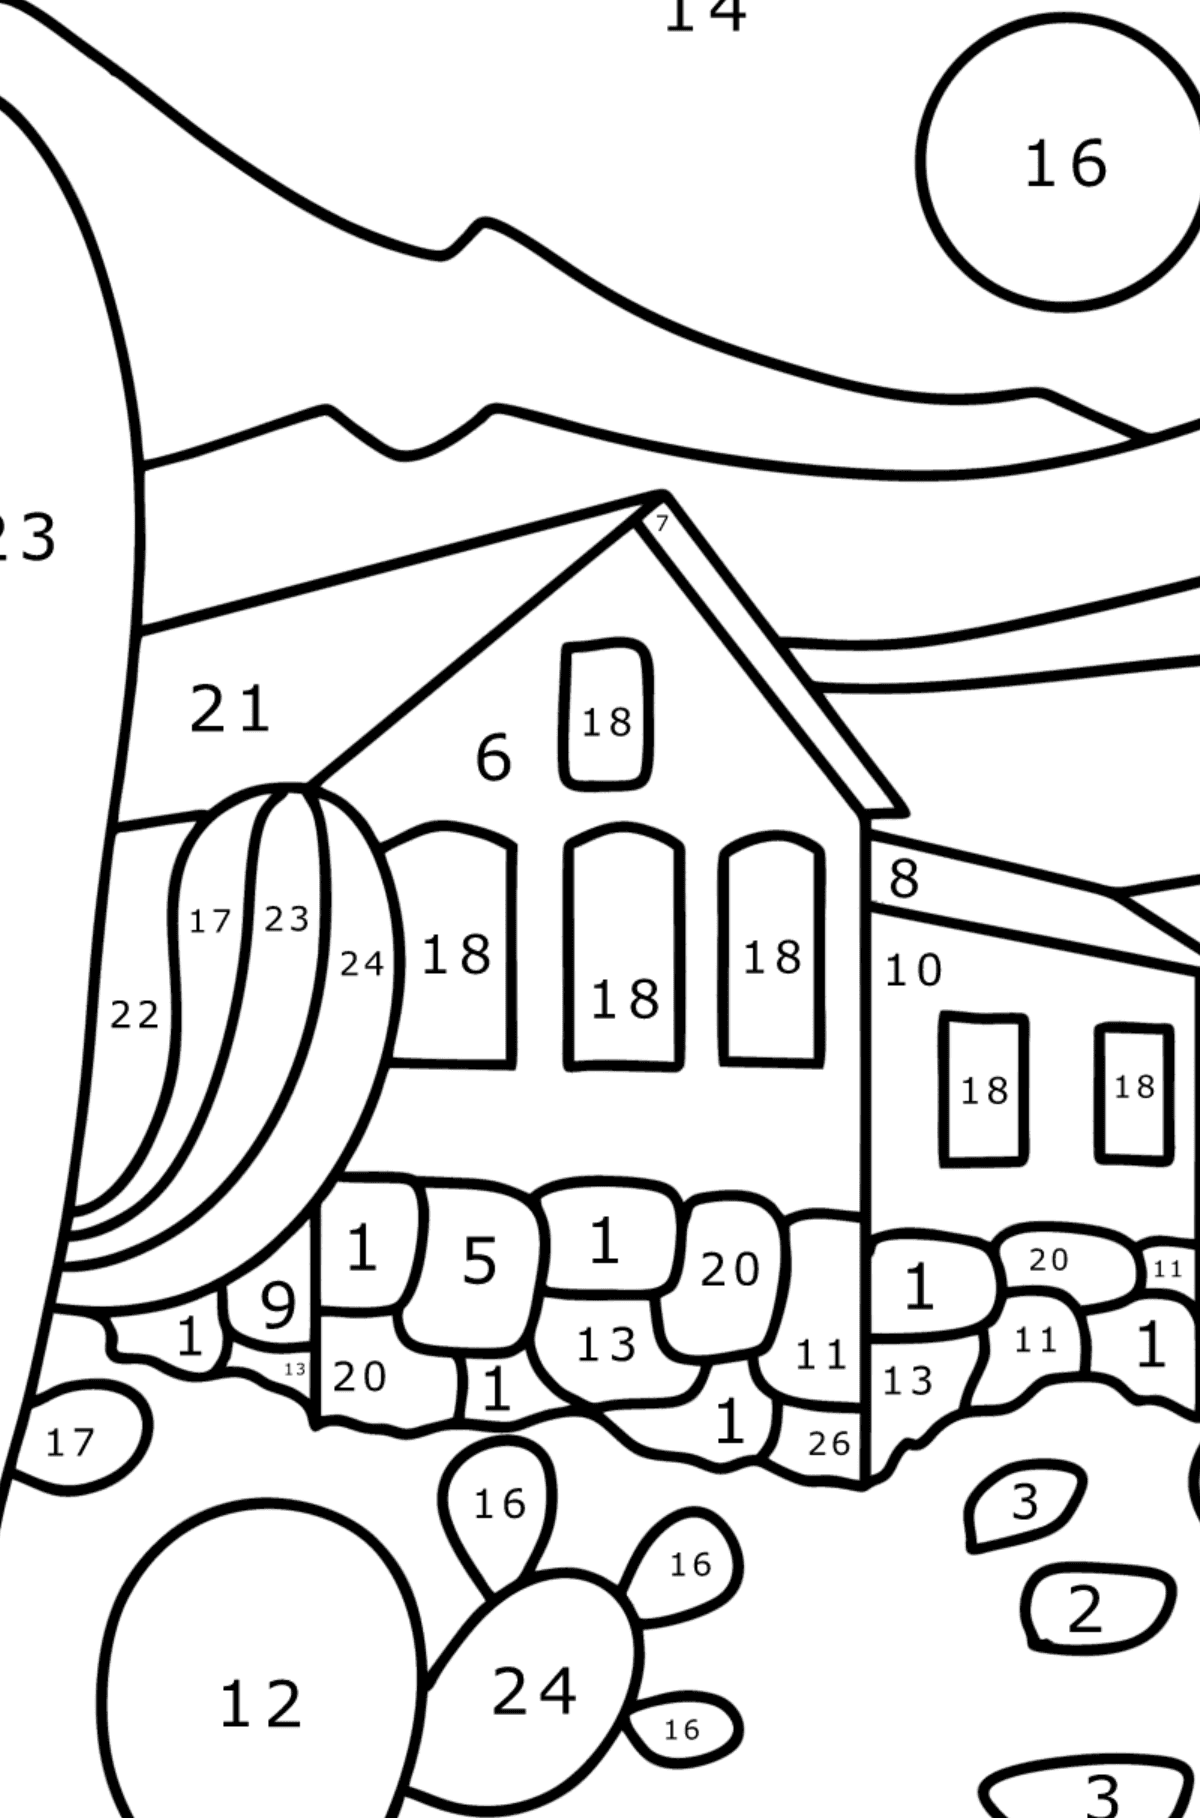 Cottage in the desert coloring page - Coloring by Numbers for Kids